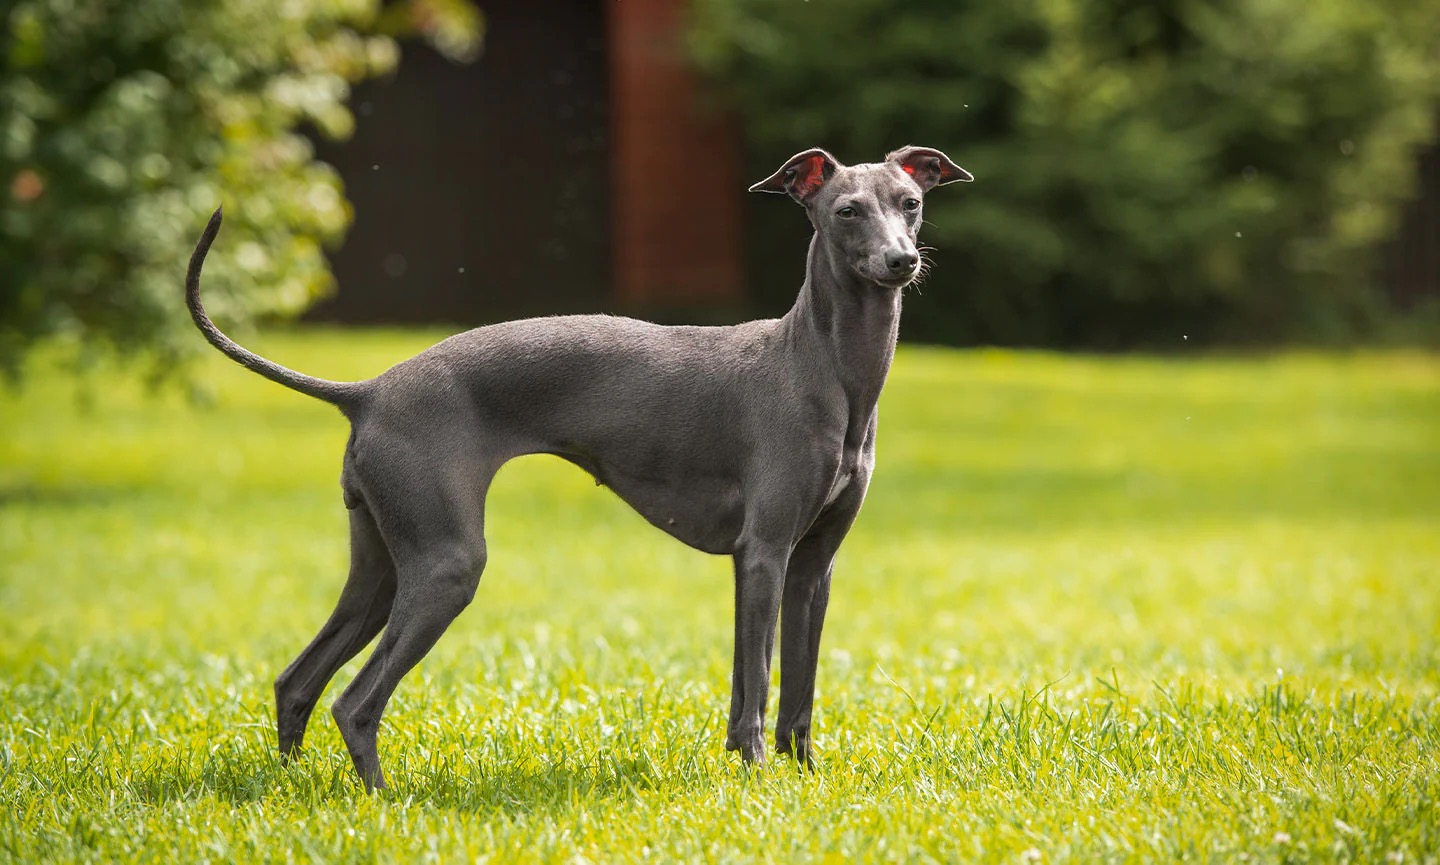 7 in 10 People Can’t Identity More Than 15 of These Dog Breeds 🐕 — Let’s See If You Can Do It Italian Greyhound